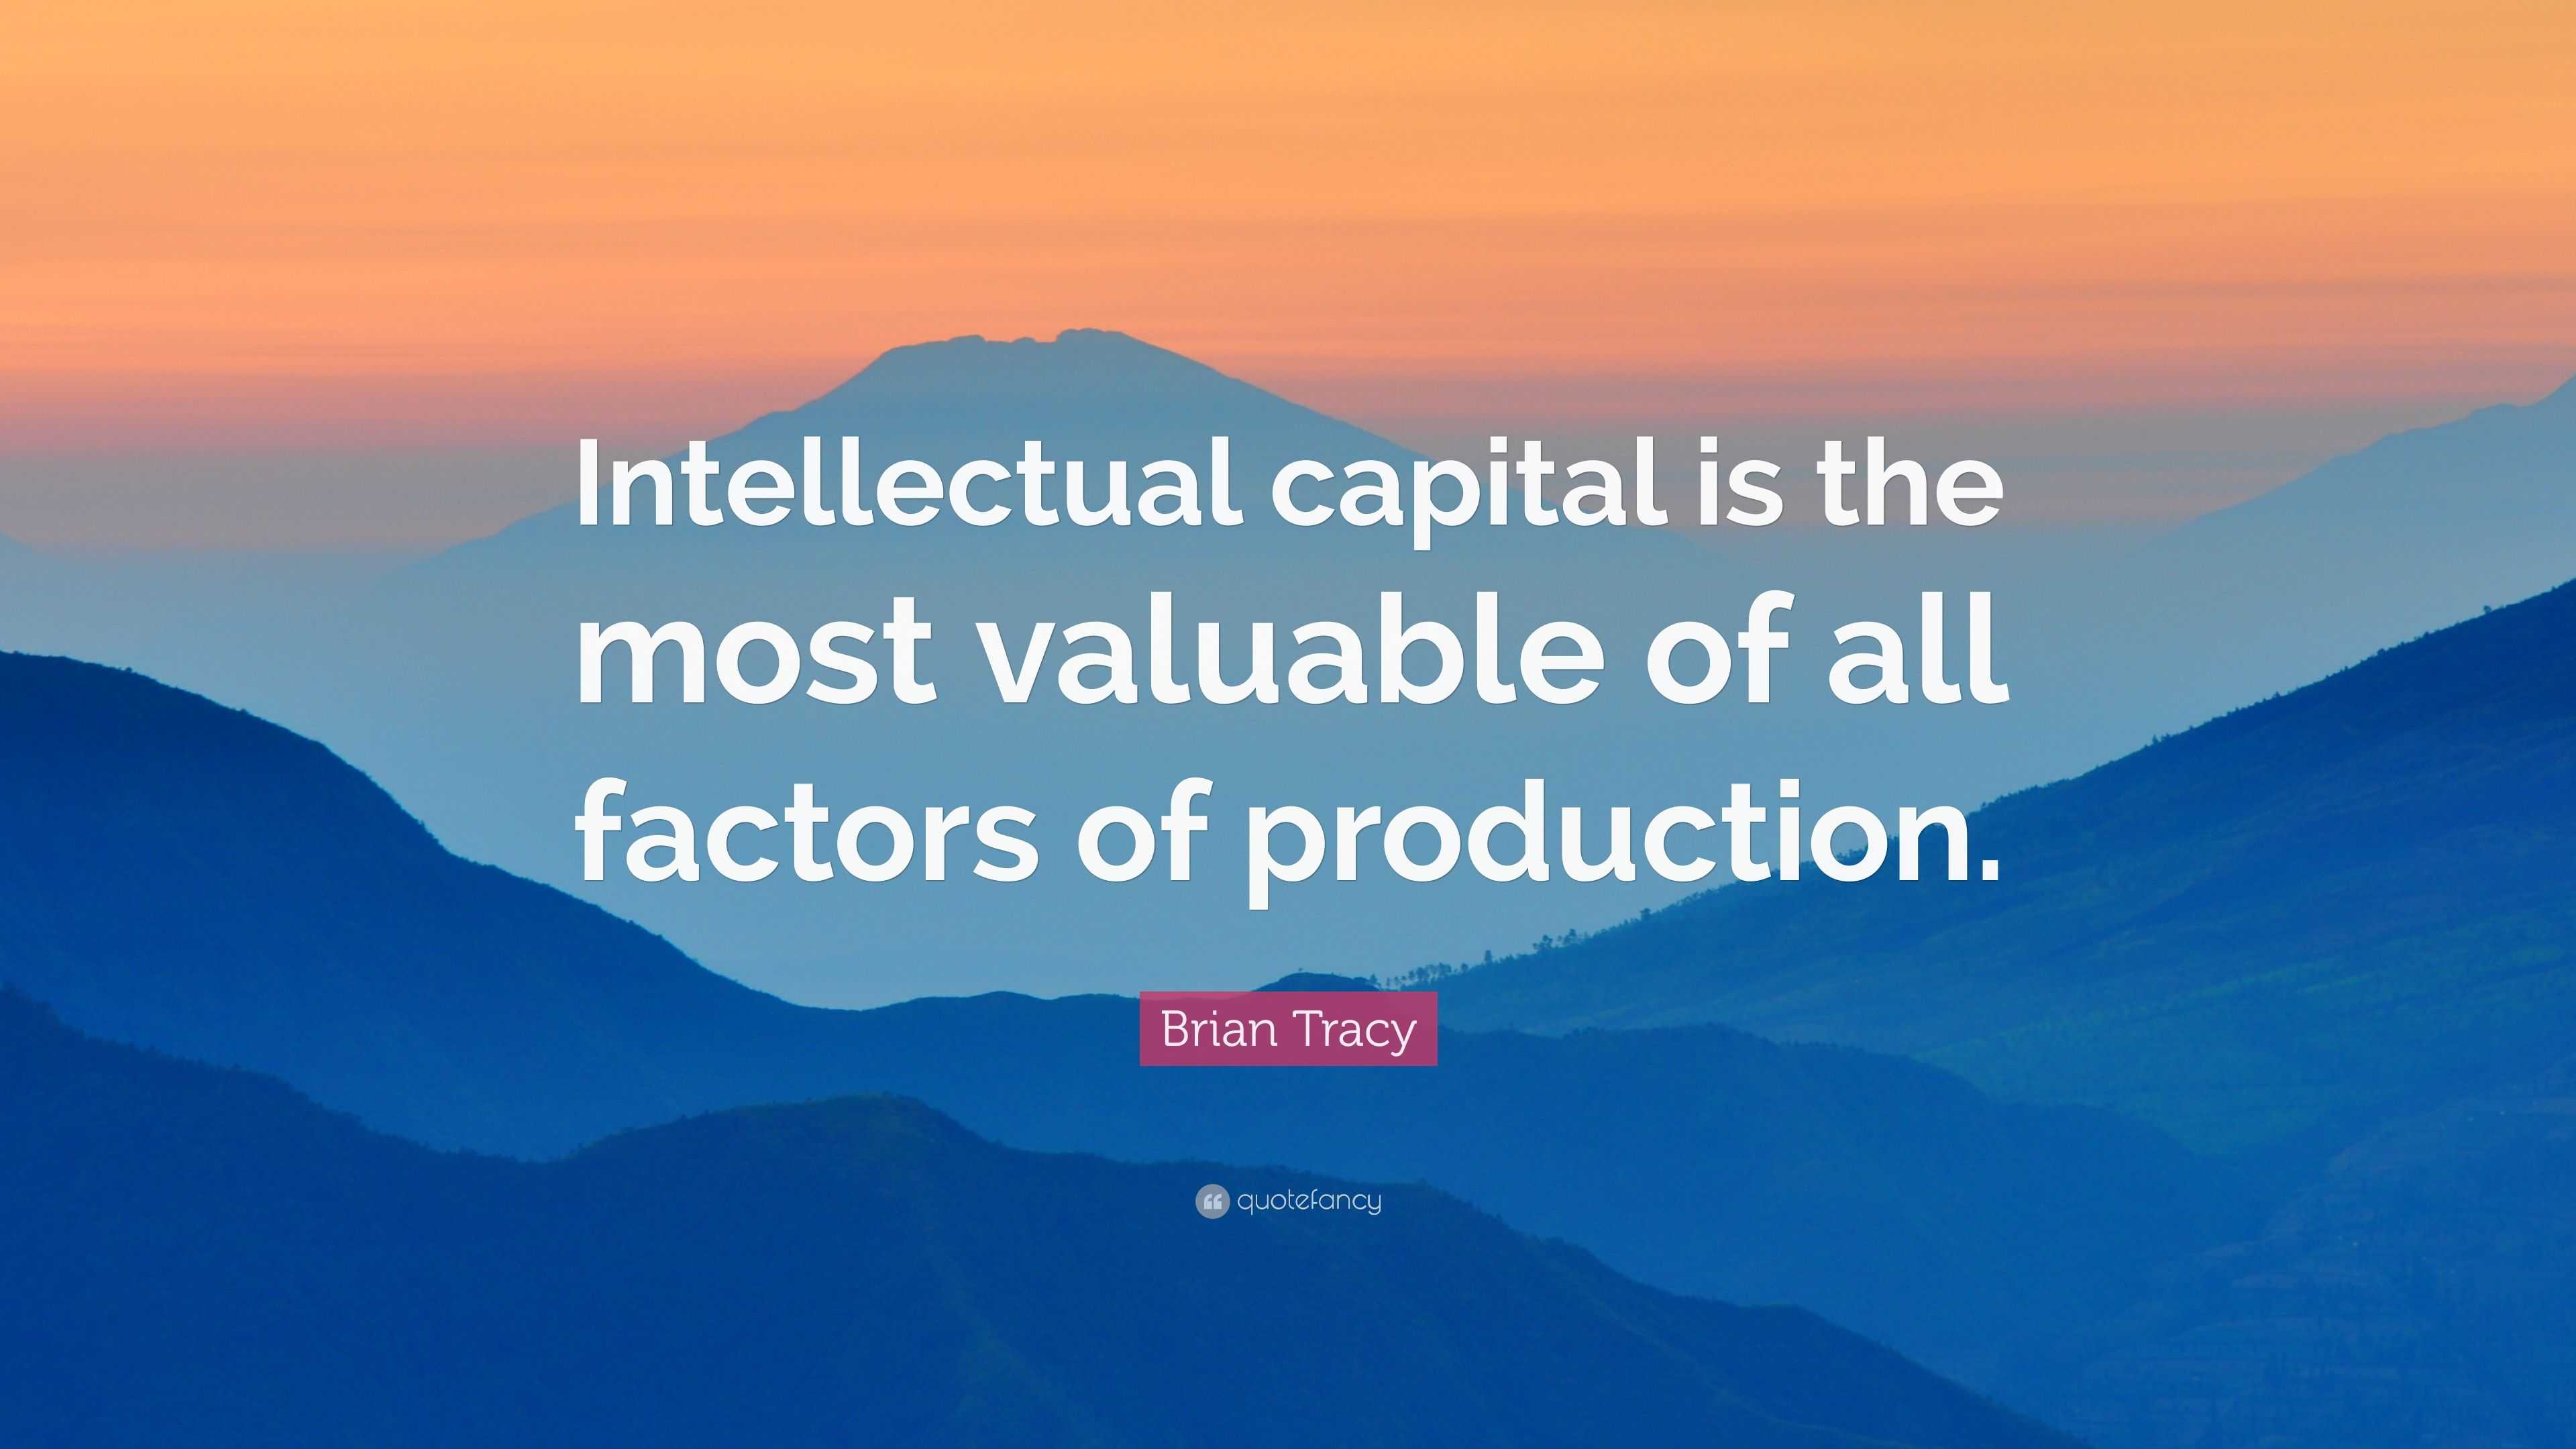 Brian Tracy Quote: “Intellectual capital is the most valuable of all ...